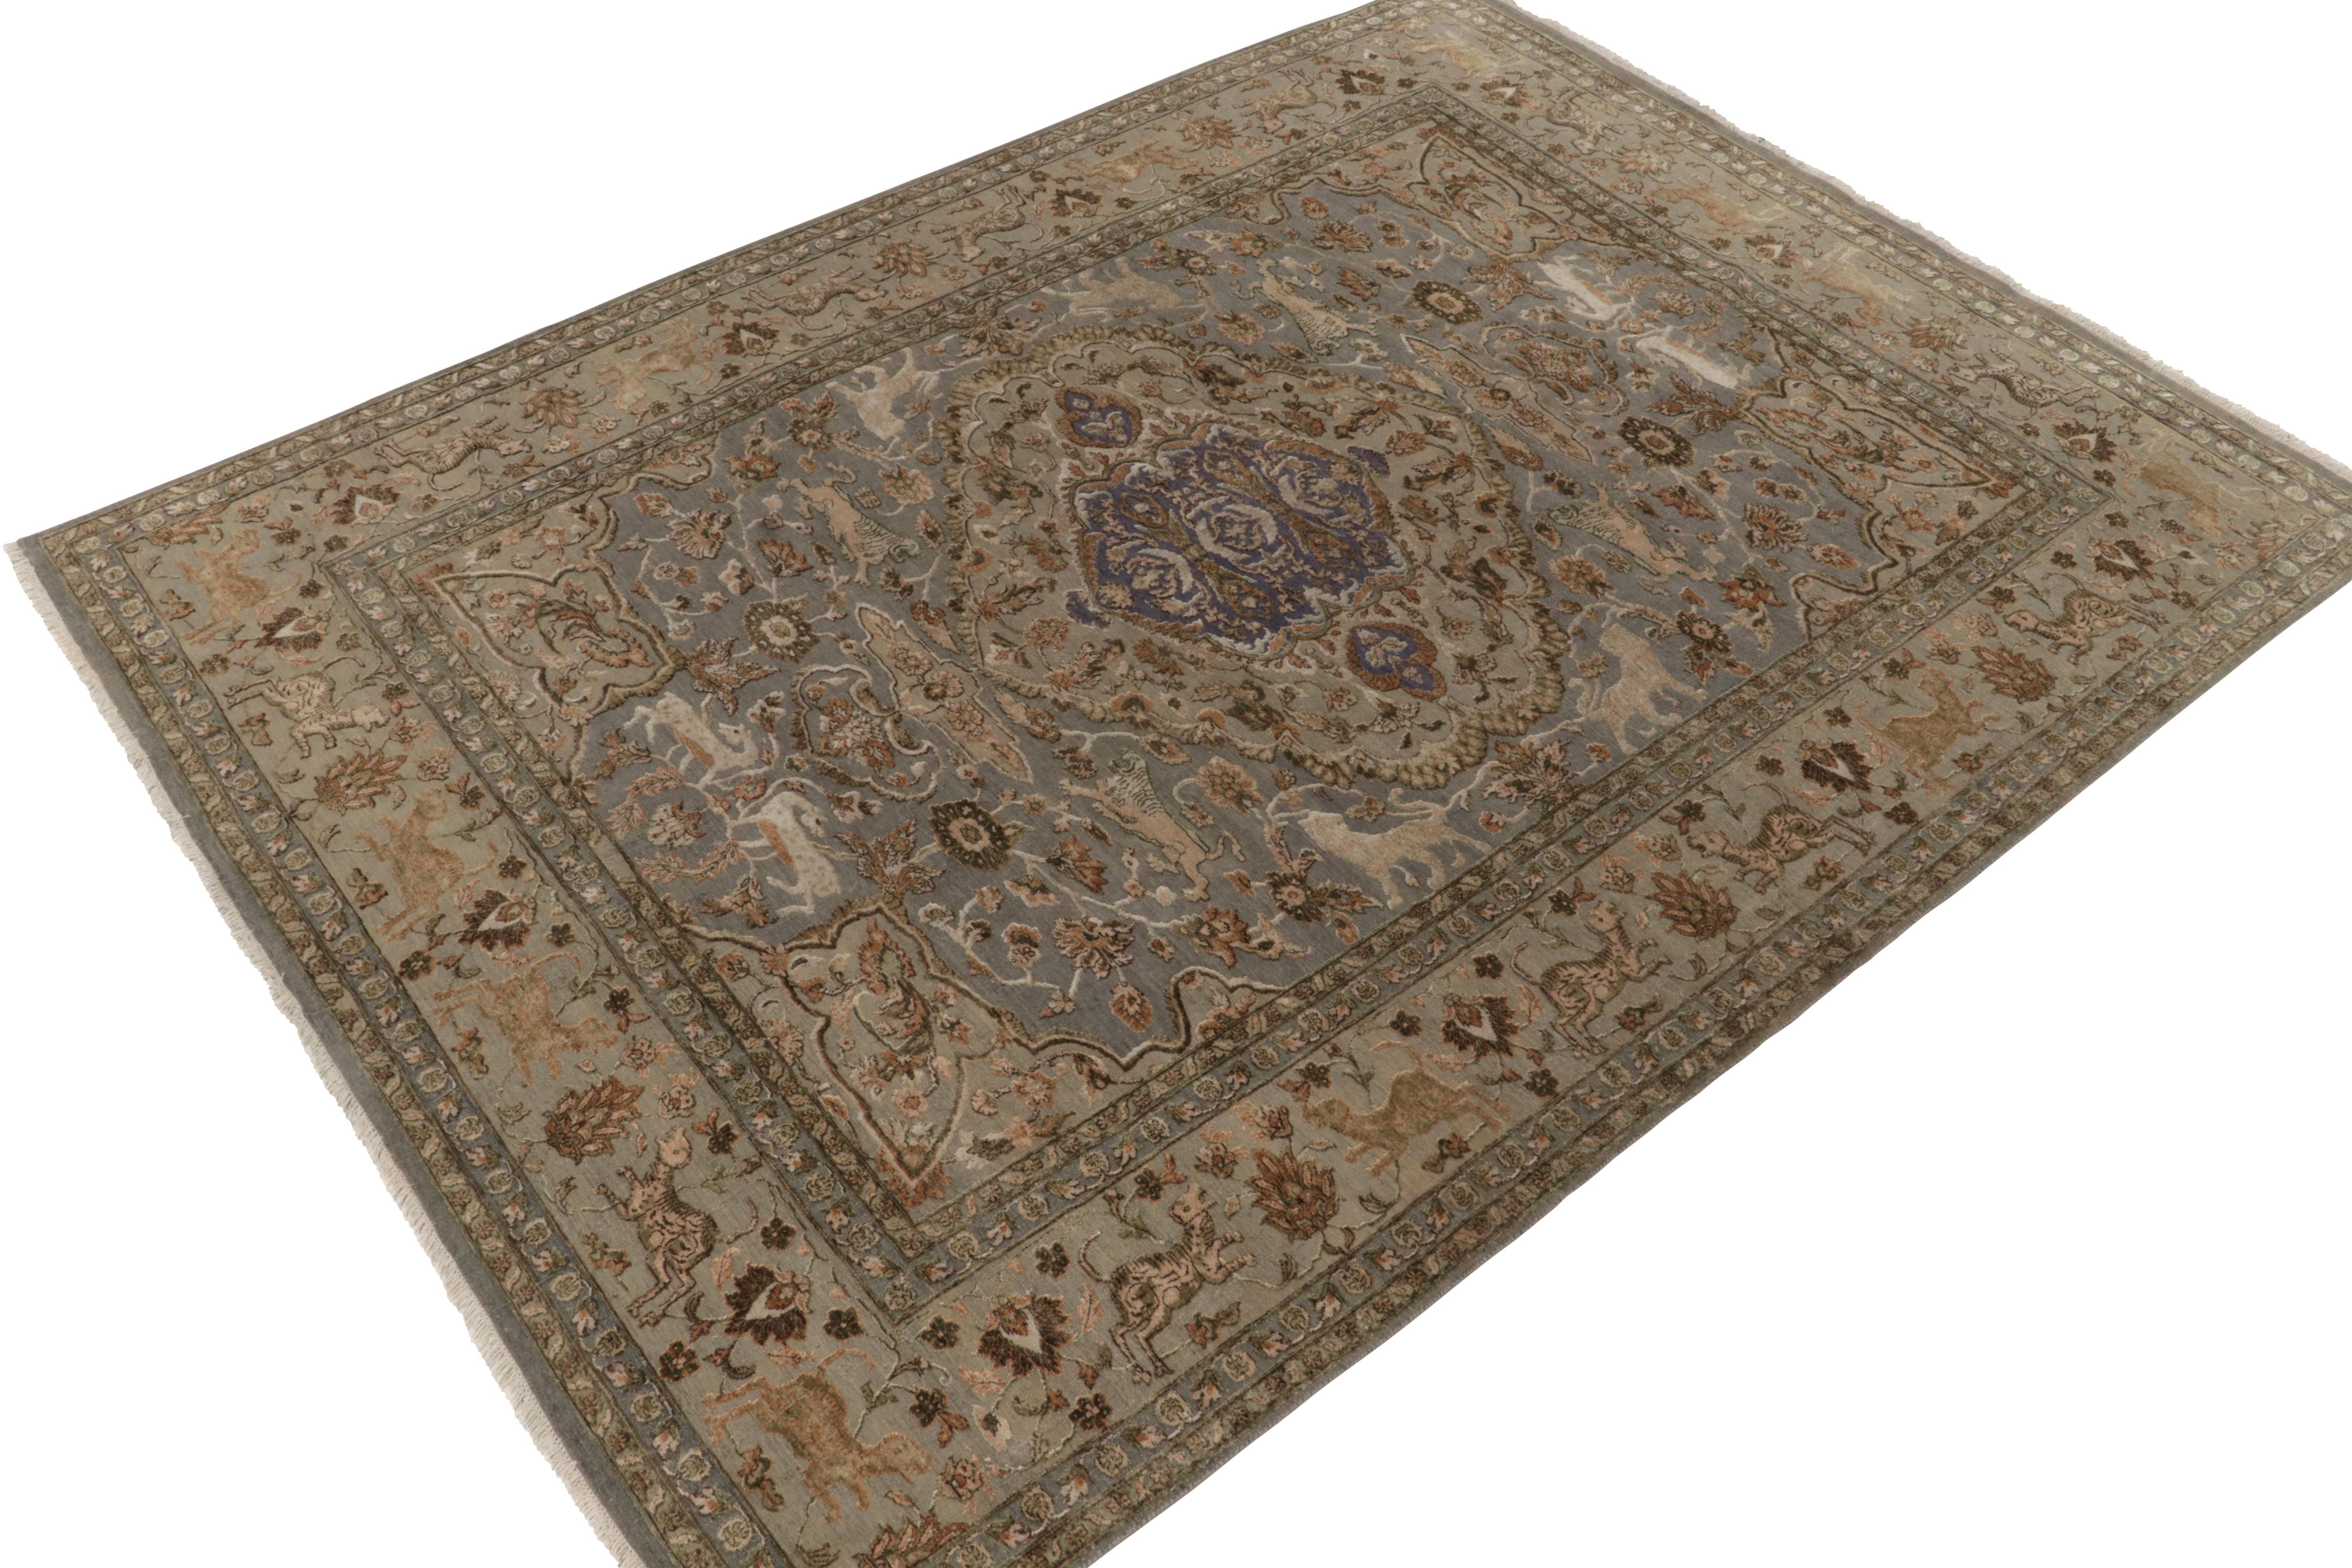 Hand-knotted in fine wool & silk, this 9x12 from our Modern Classics collection draws inspiration from the most regal antique Tabriz rug styles. 

On the Design: The gracious scale carries pictorial styles depicting animal representations, which